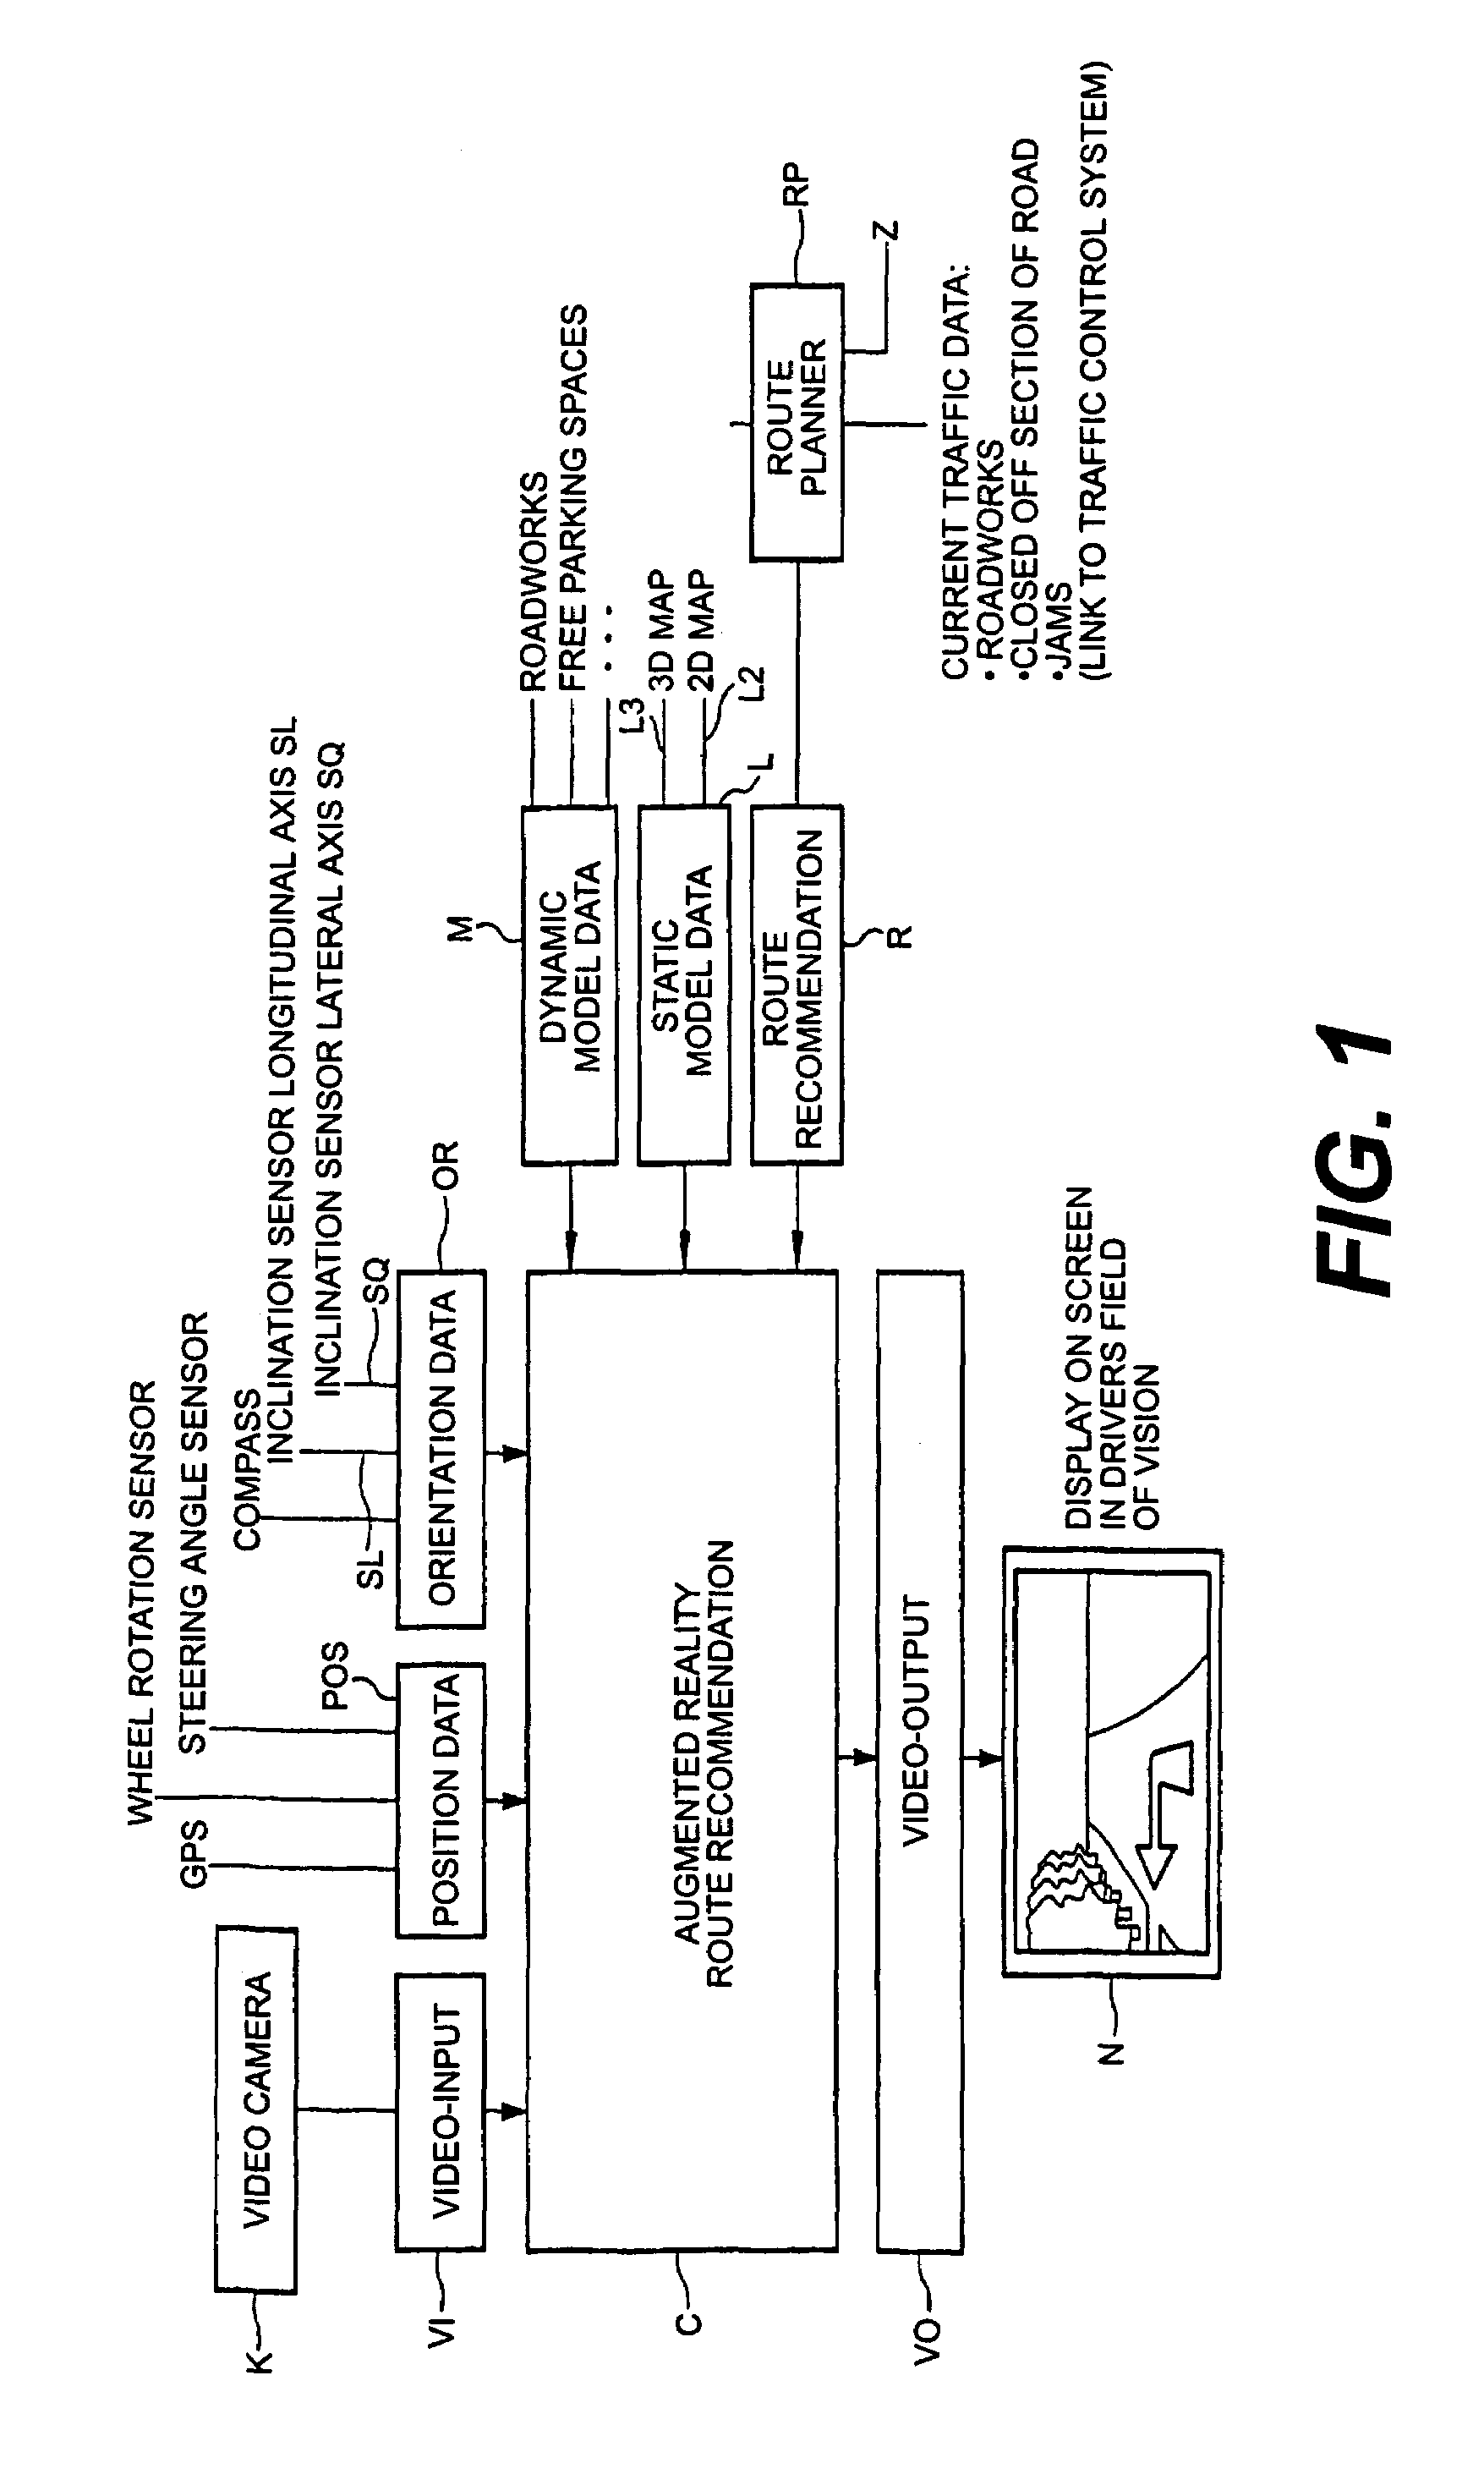 Method and device for displaying driving instructions, especially in car navigation systems